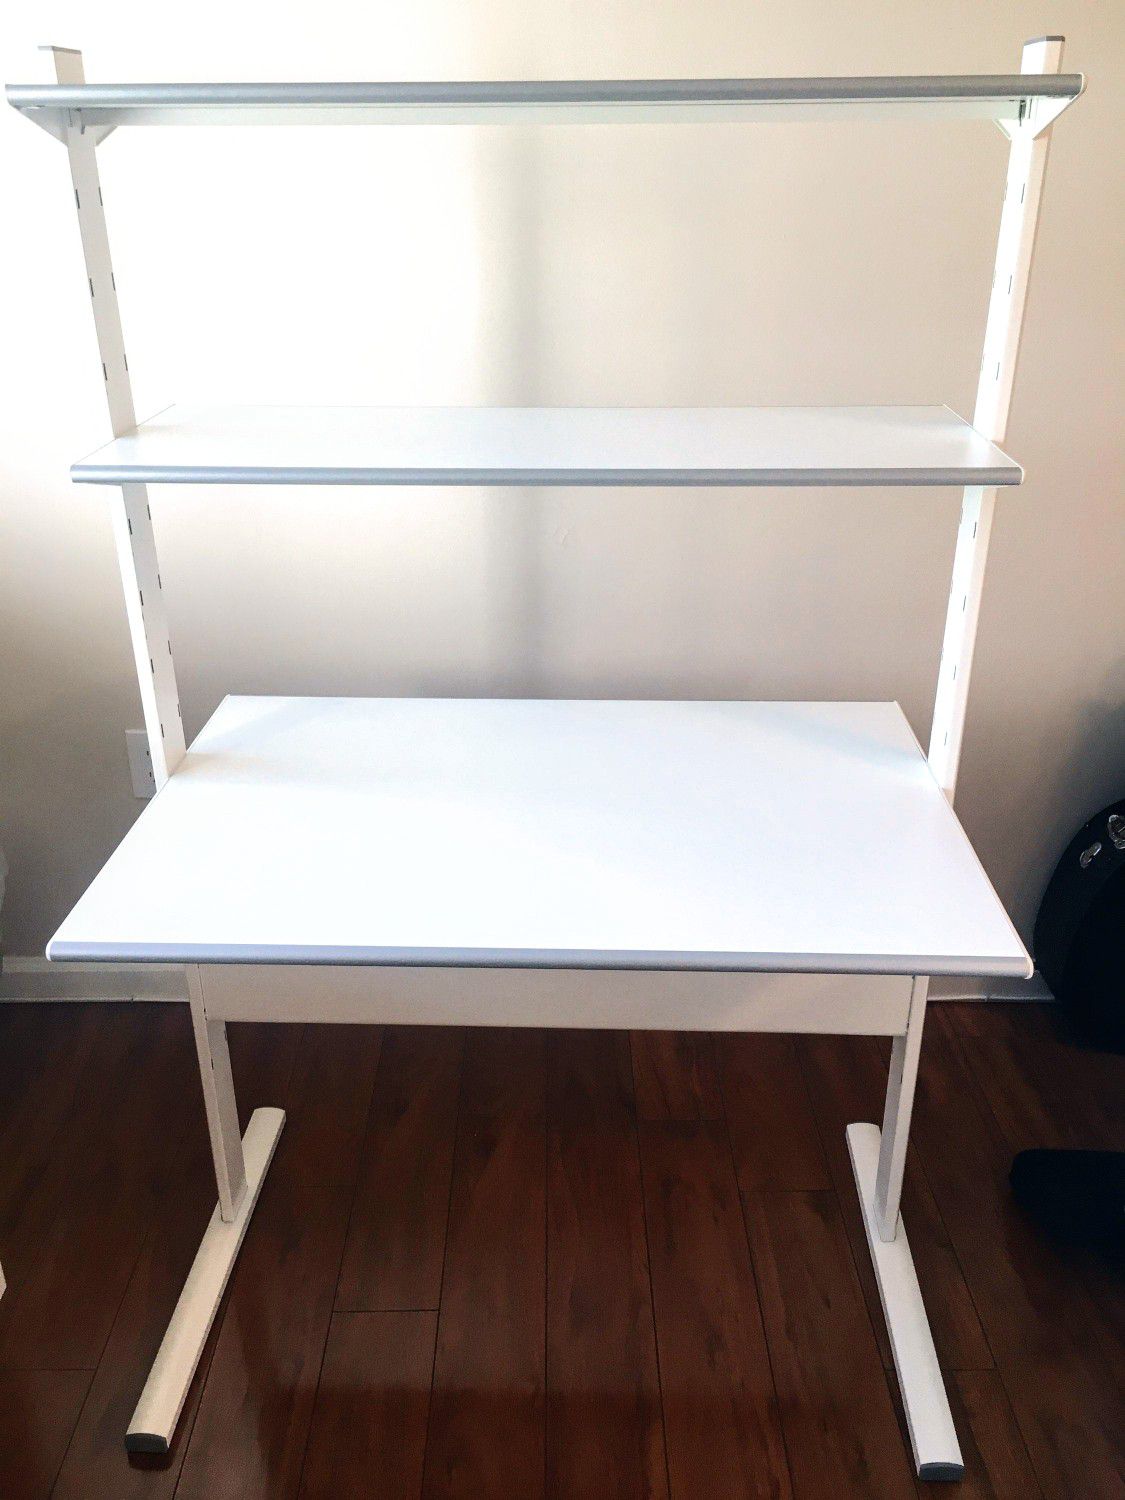 Desk with built in shelving